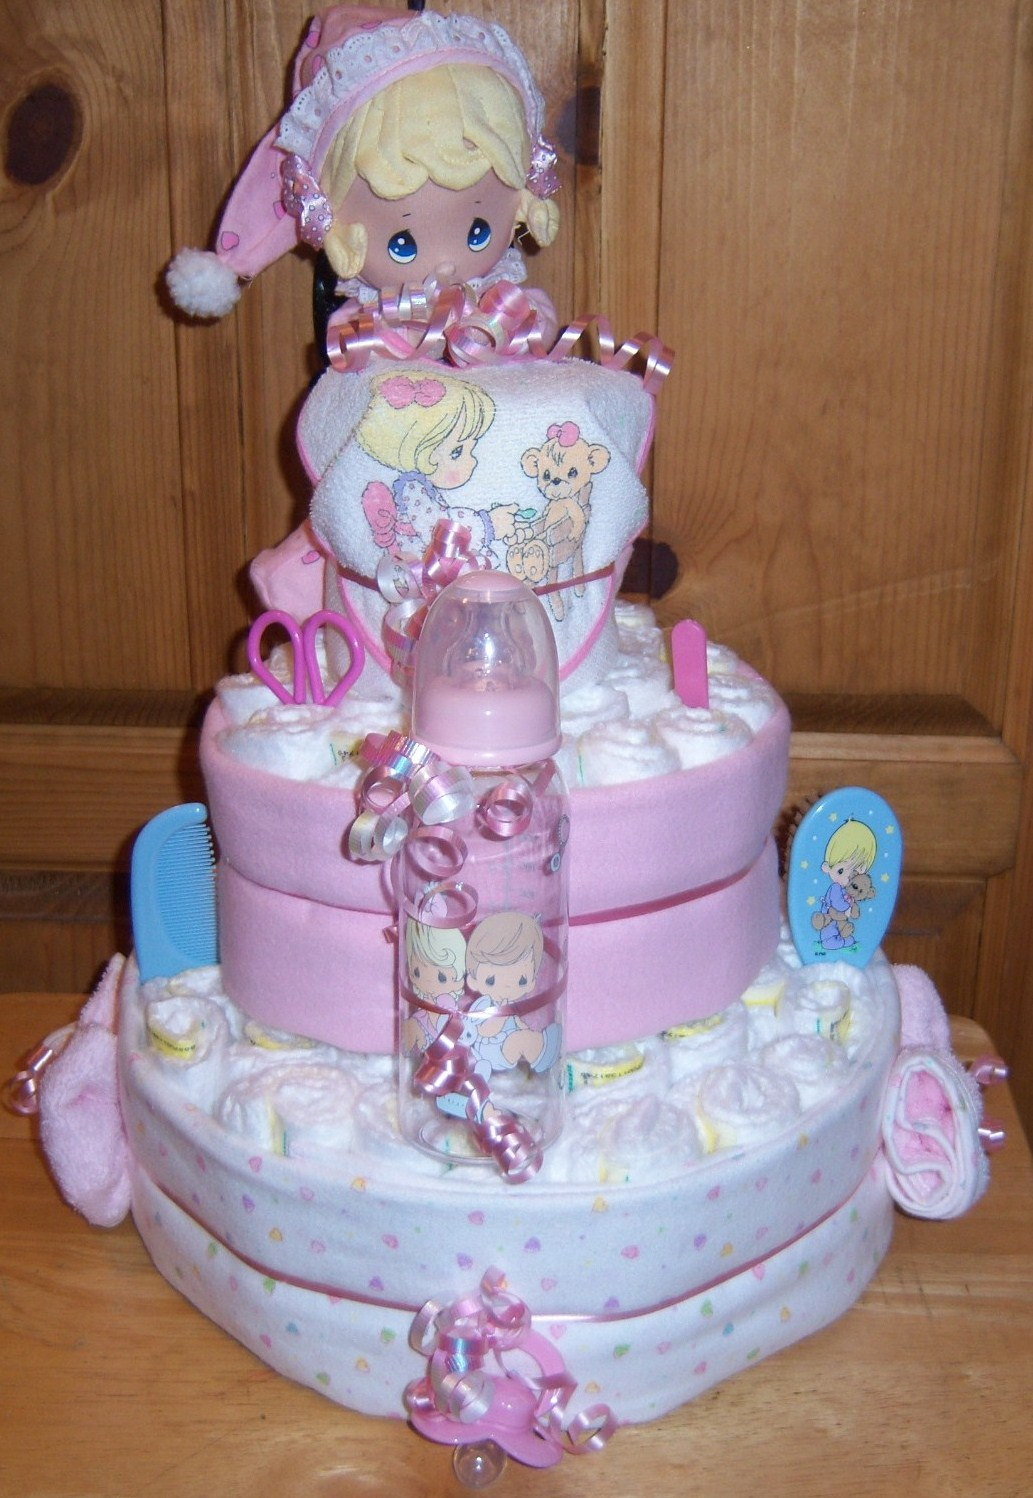 Baby Shower Precious Moments 3 Tier Diaper Cake by BabyDiaperCakes